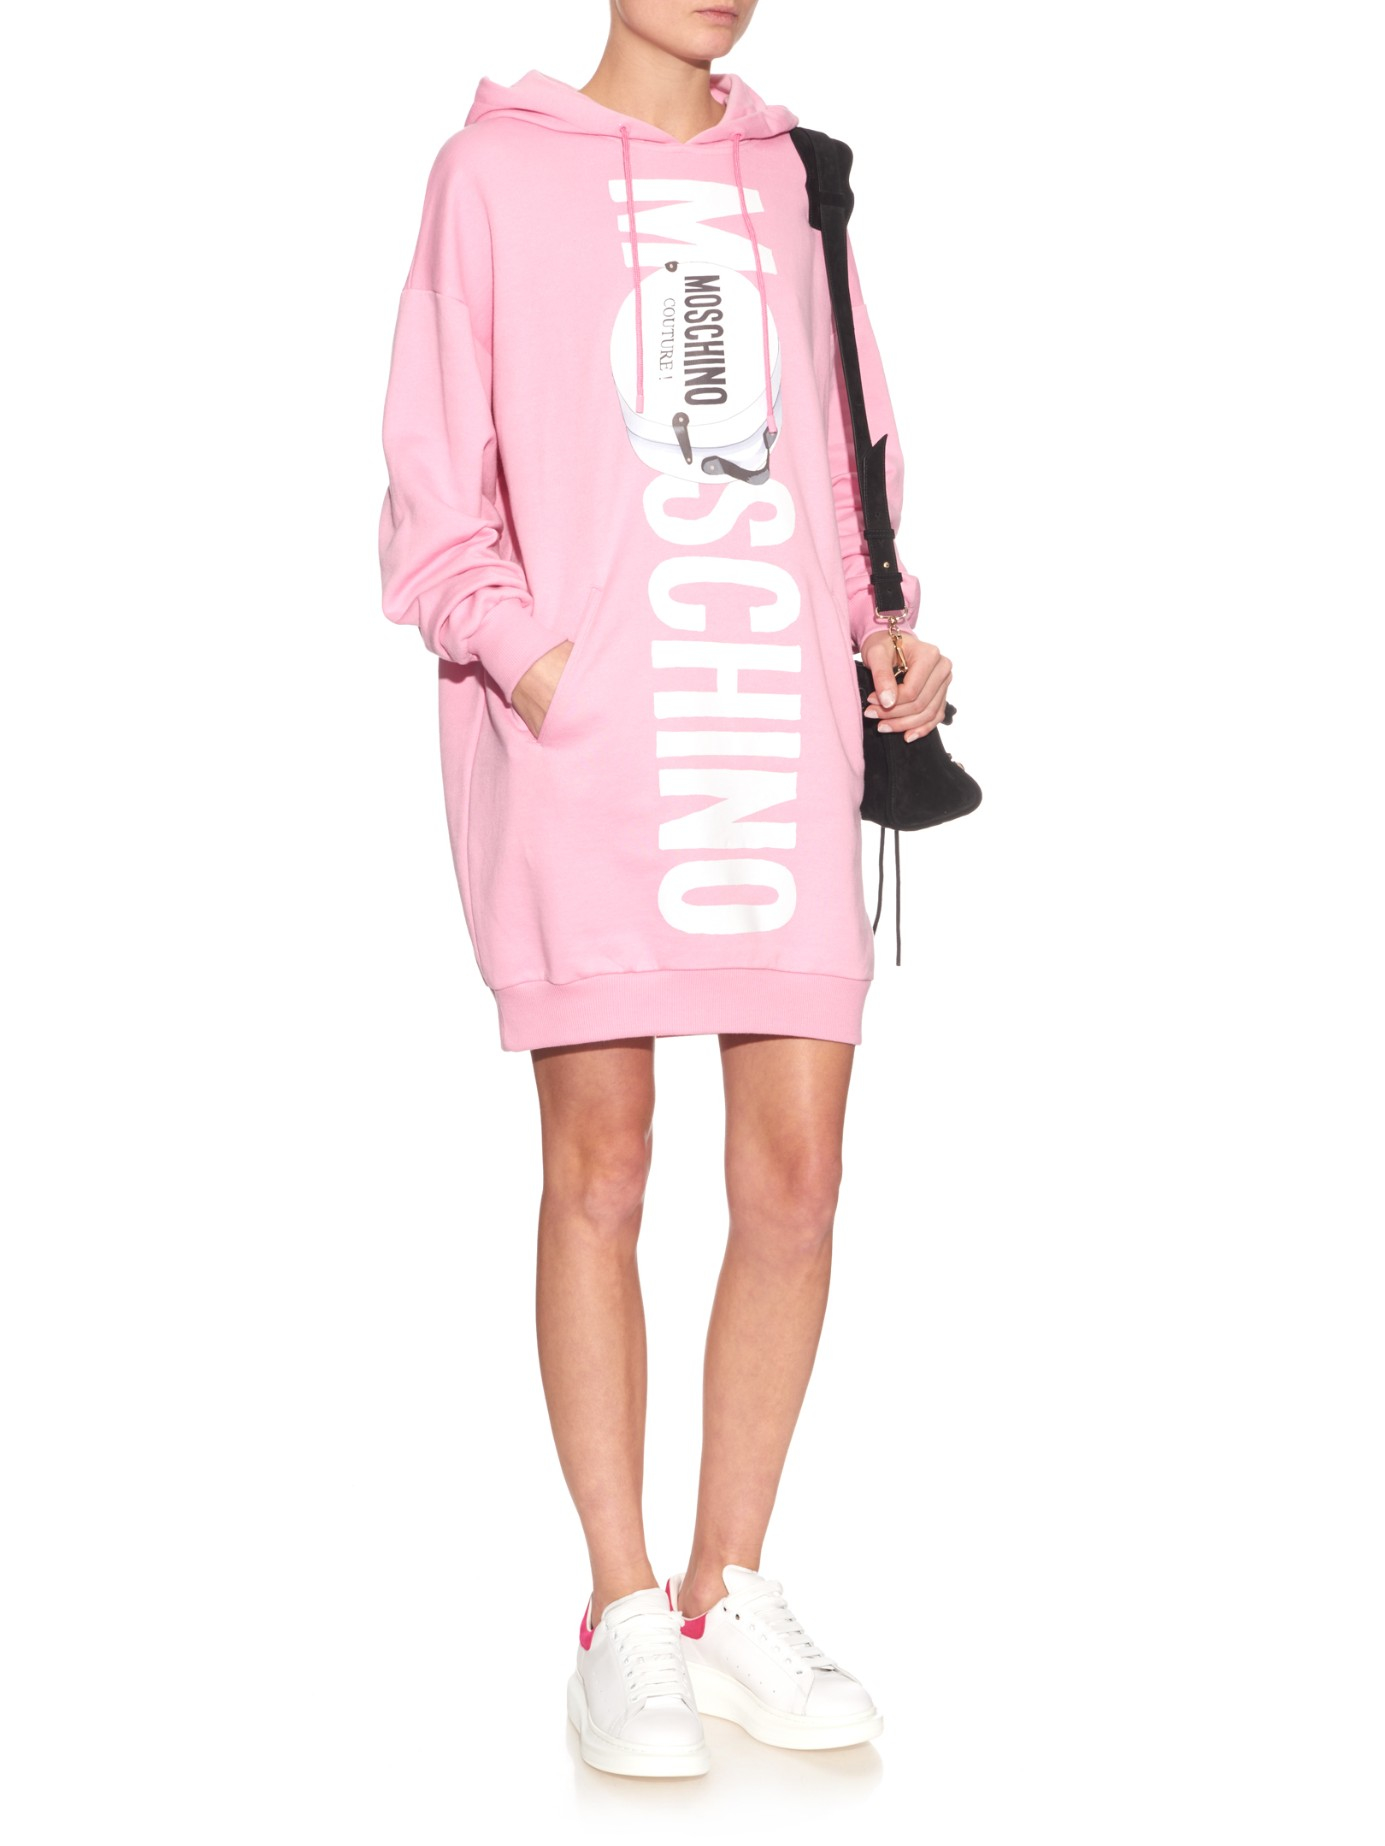 Lyst - Moschino Oversized Hooded Logo Sweater Dress in Pink